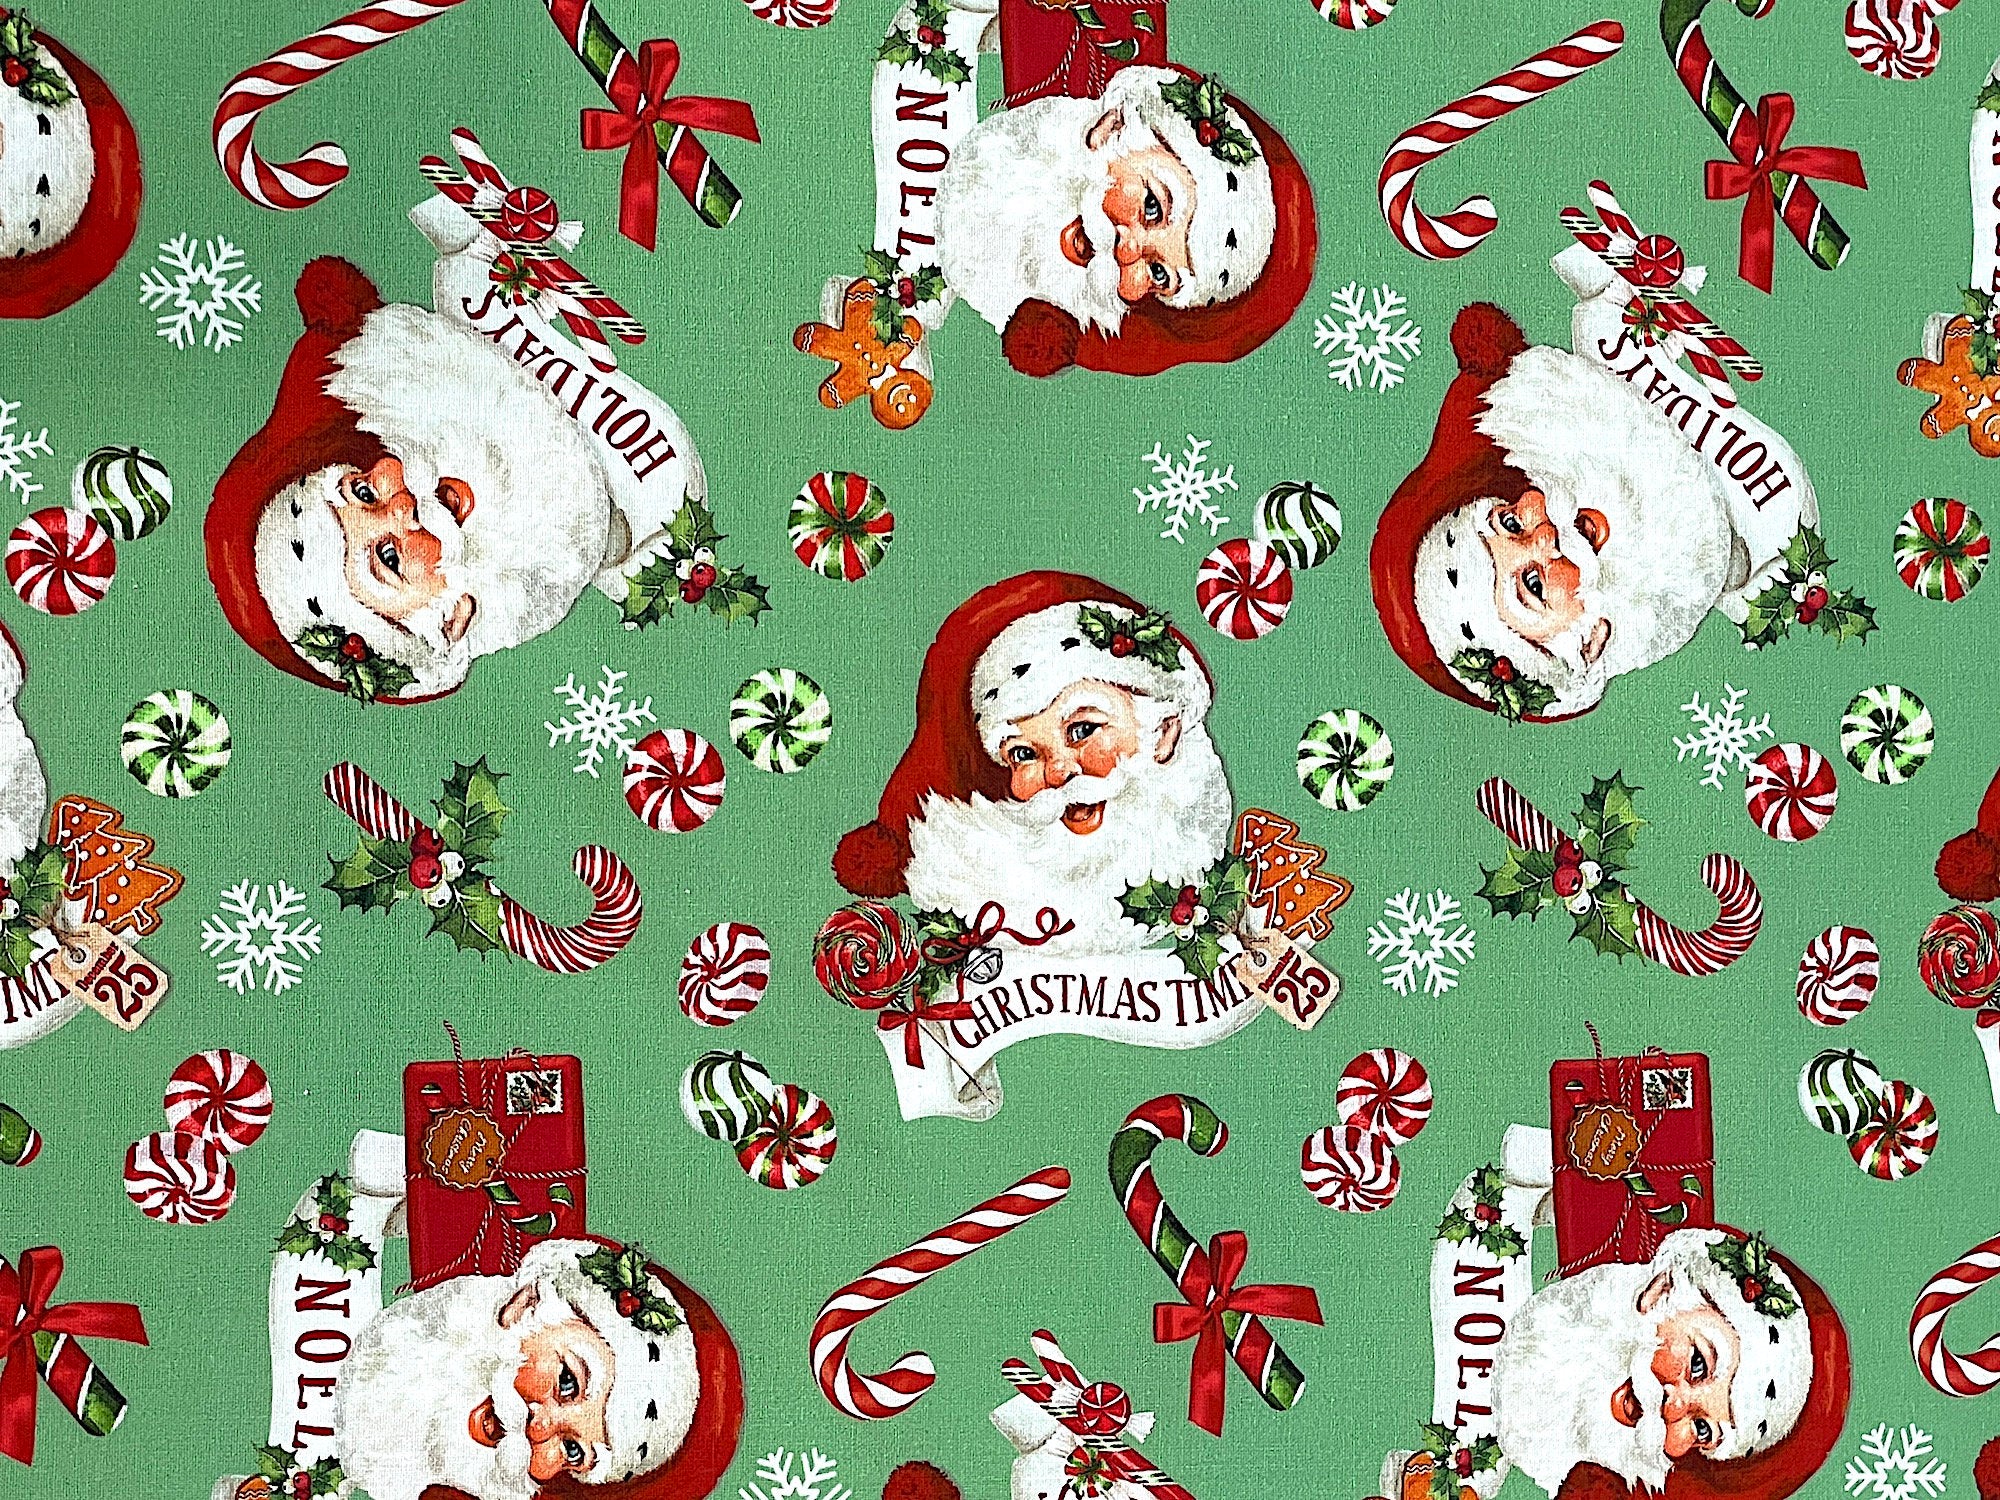 This fabric is part of the Peppermint Candy collection by Northcott Fabrics. This green fabric is covered with Santa Claus, Peppermint candy snowflakes and more